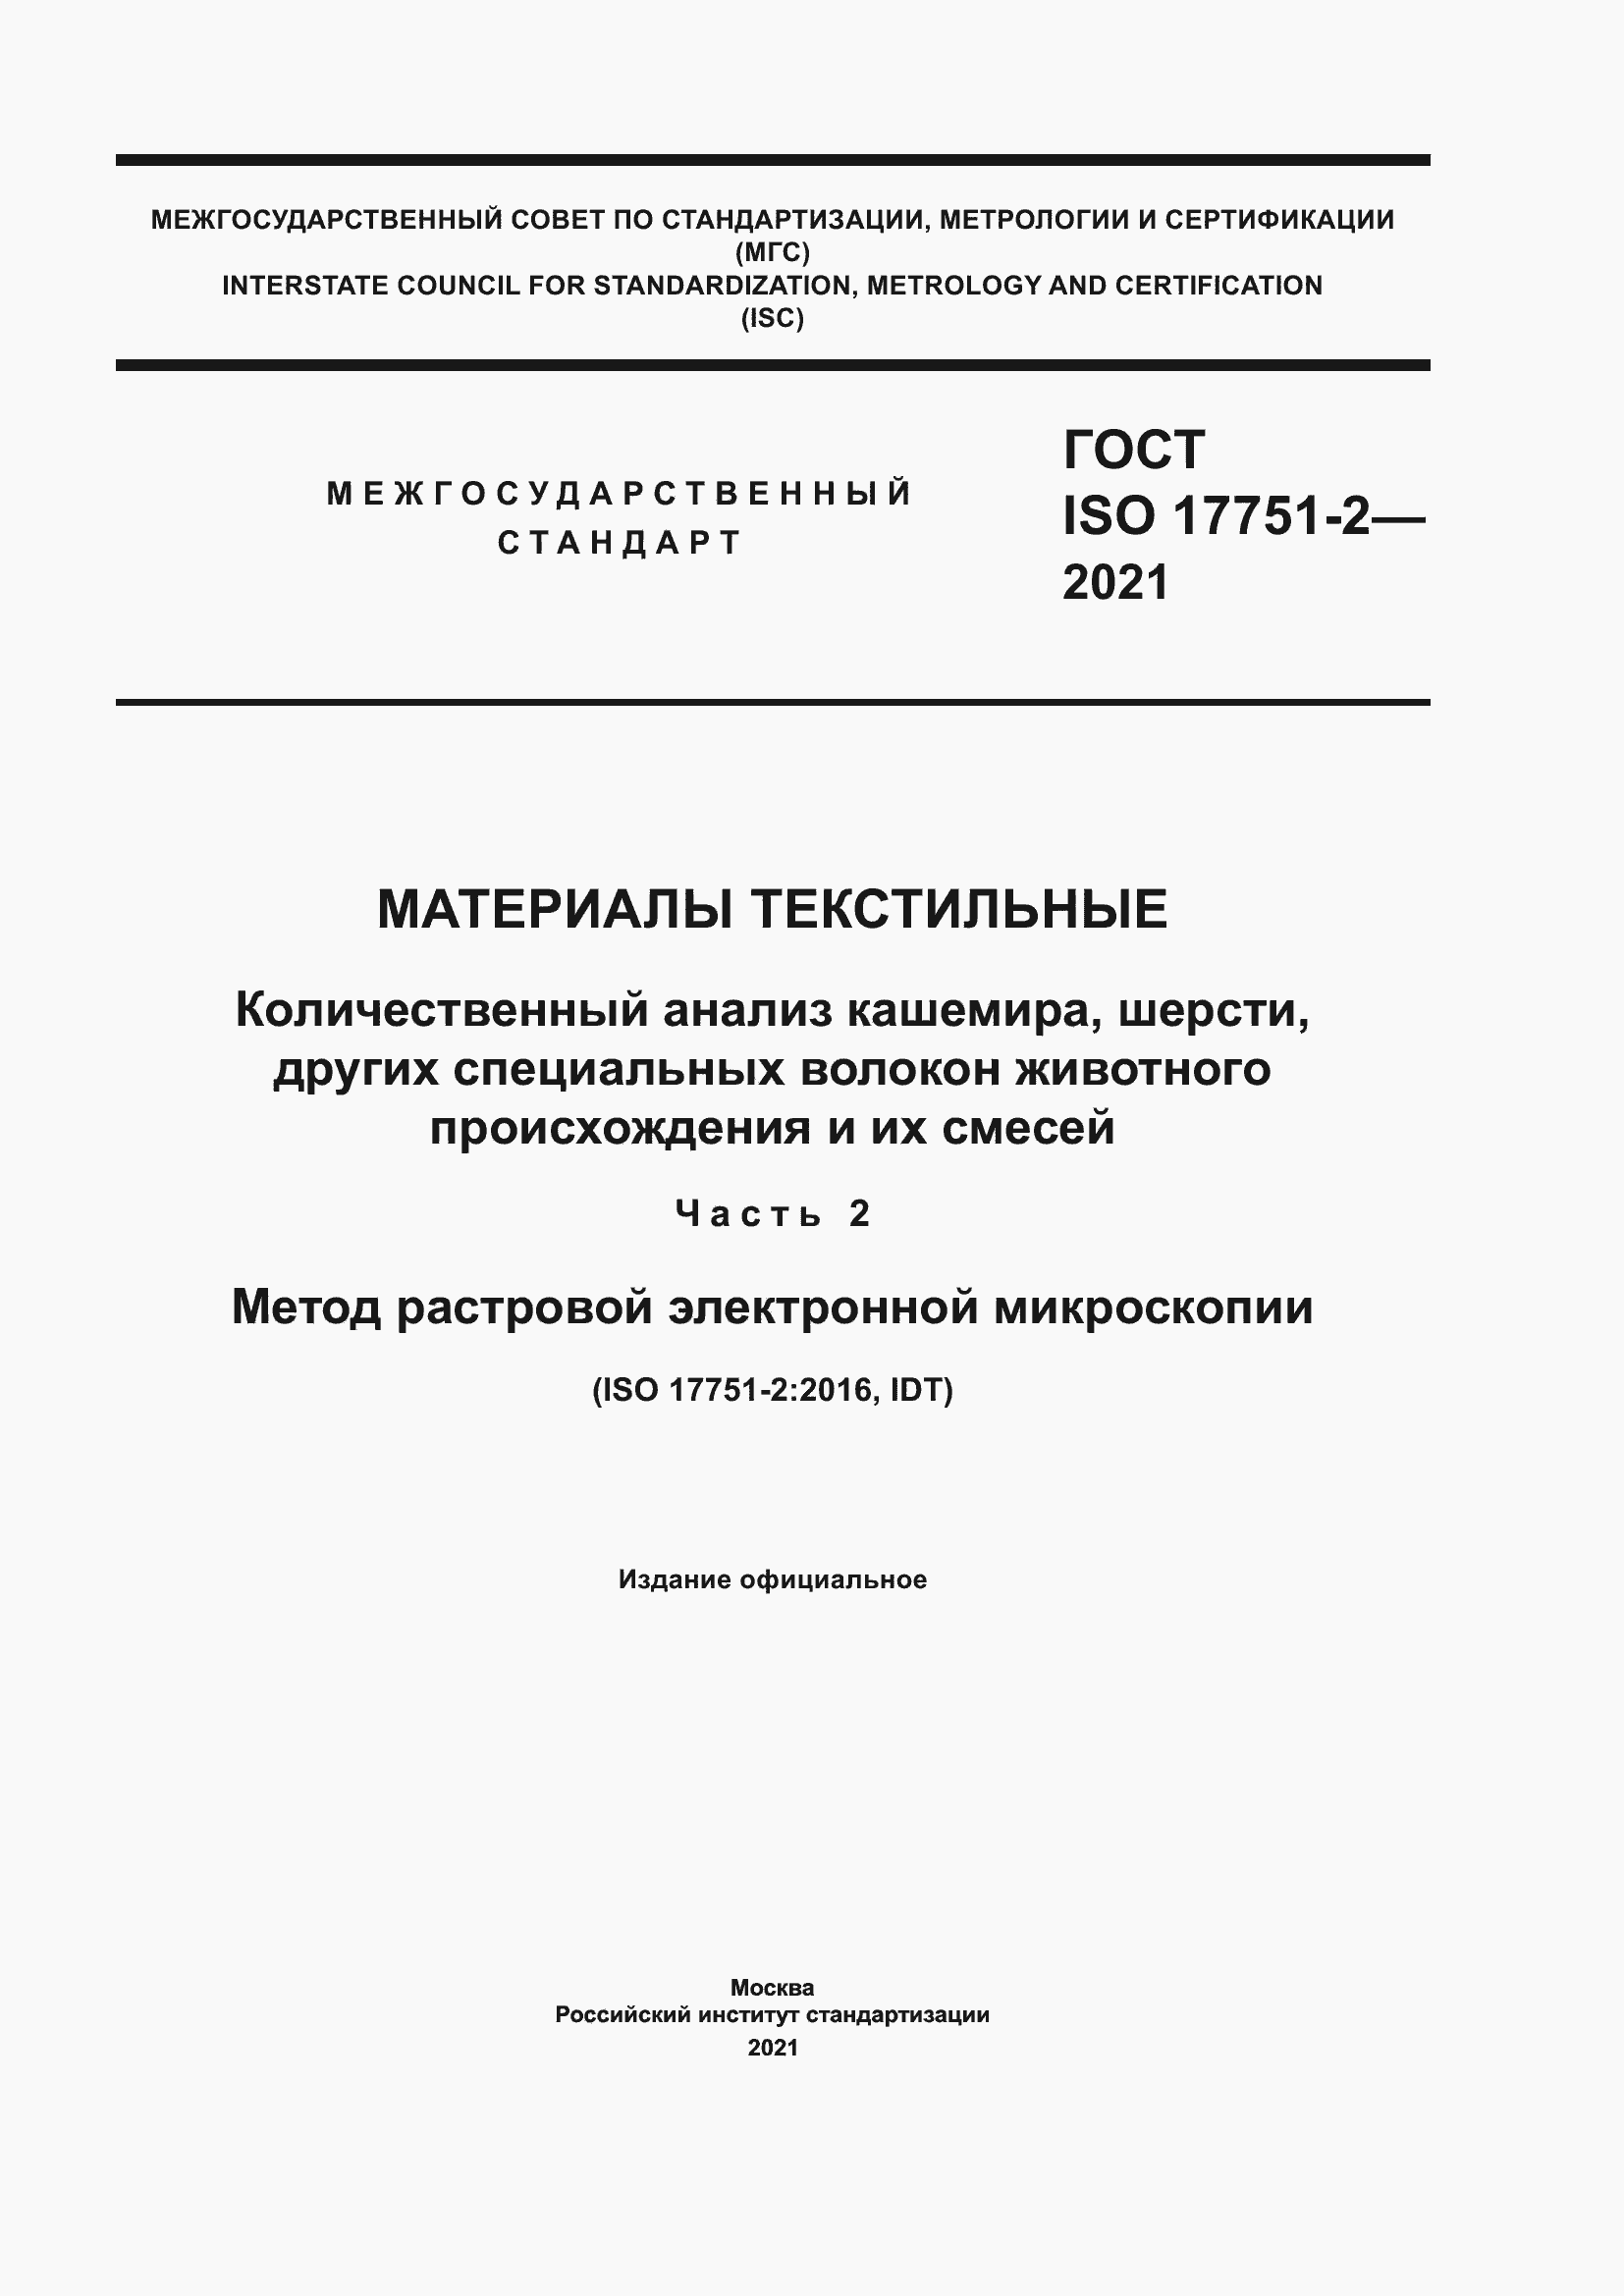  ISO 17751-2-2021.  1